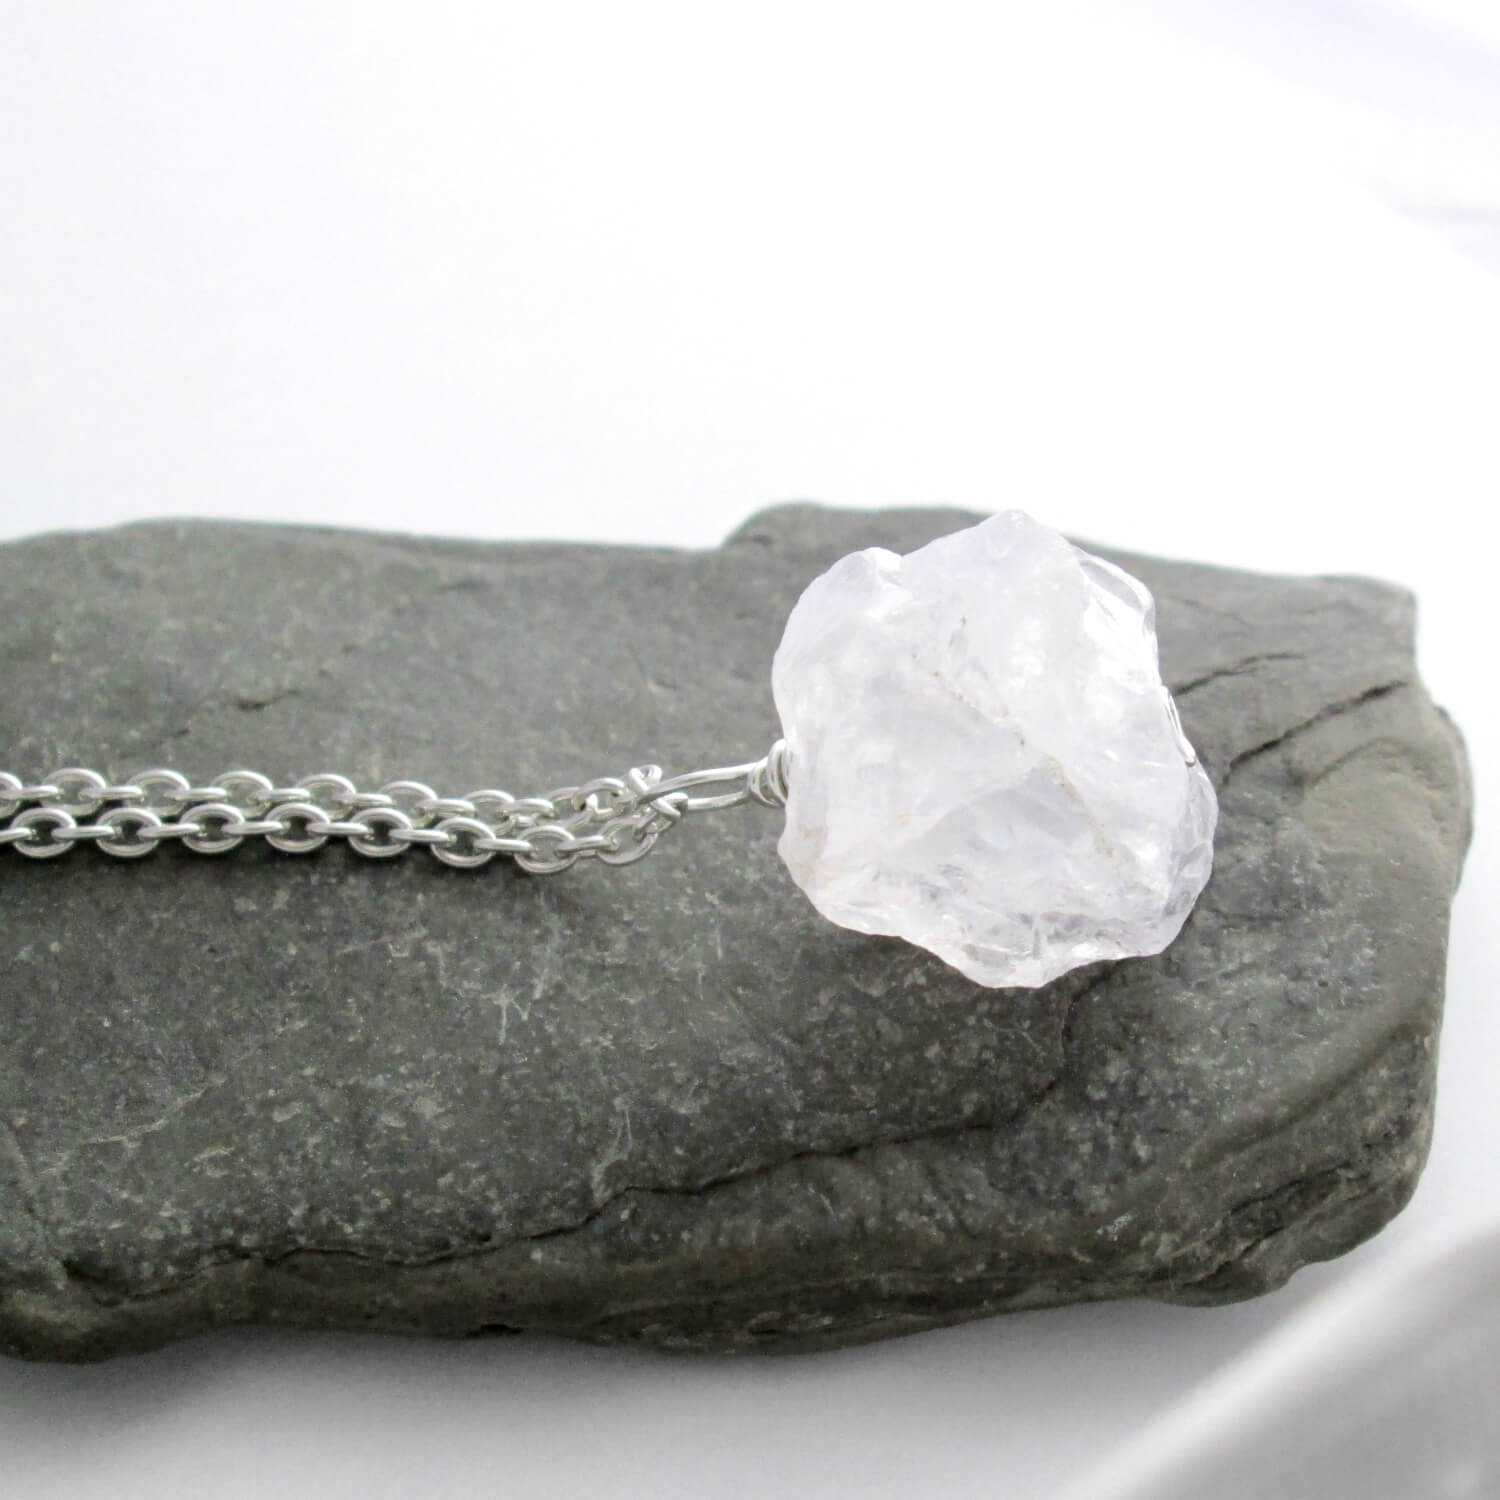 Crystal Rock Quartz and Silver Healing Gemstone Necklace - Etsy